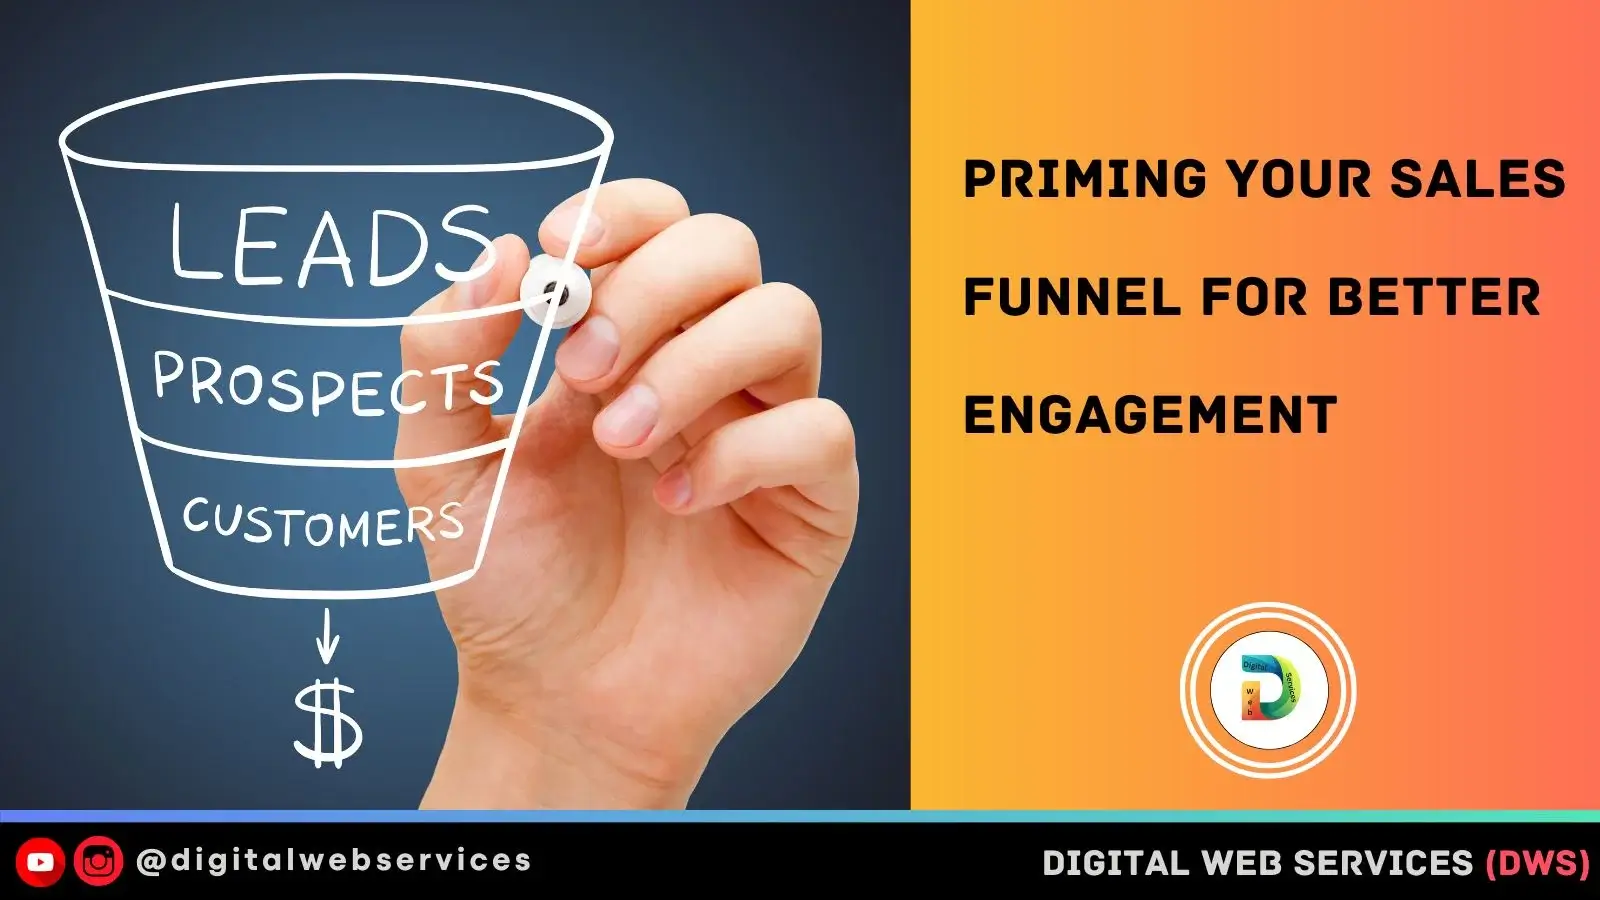 How To Optimize Your Marketing Sales Funnel For Targeted Engagement